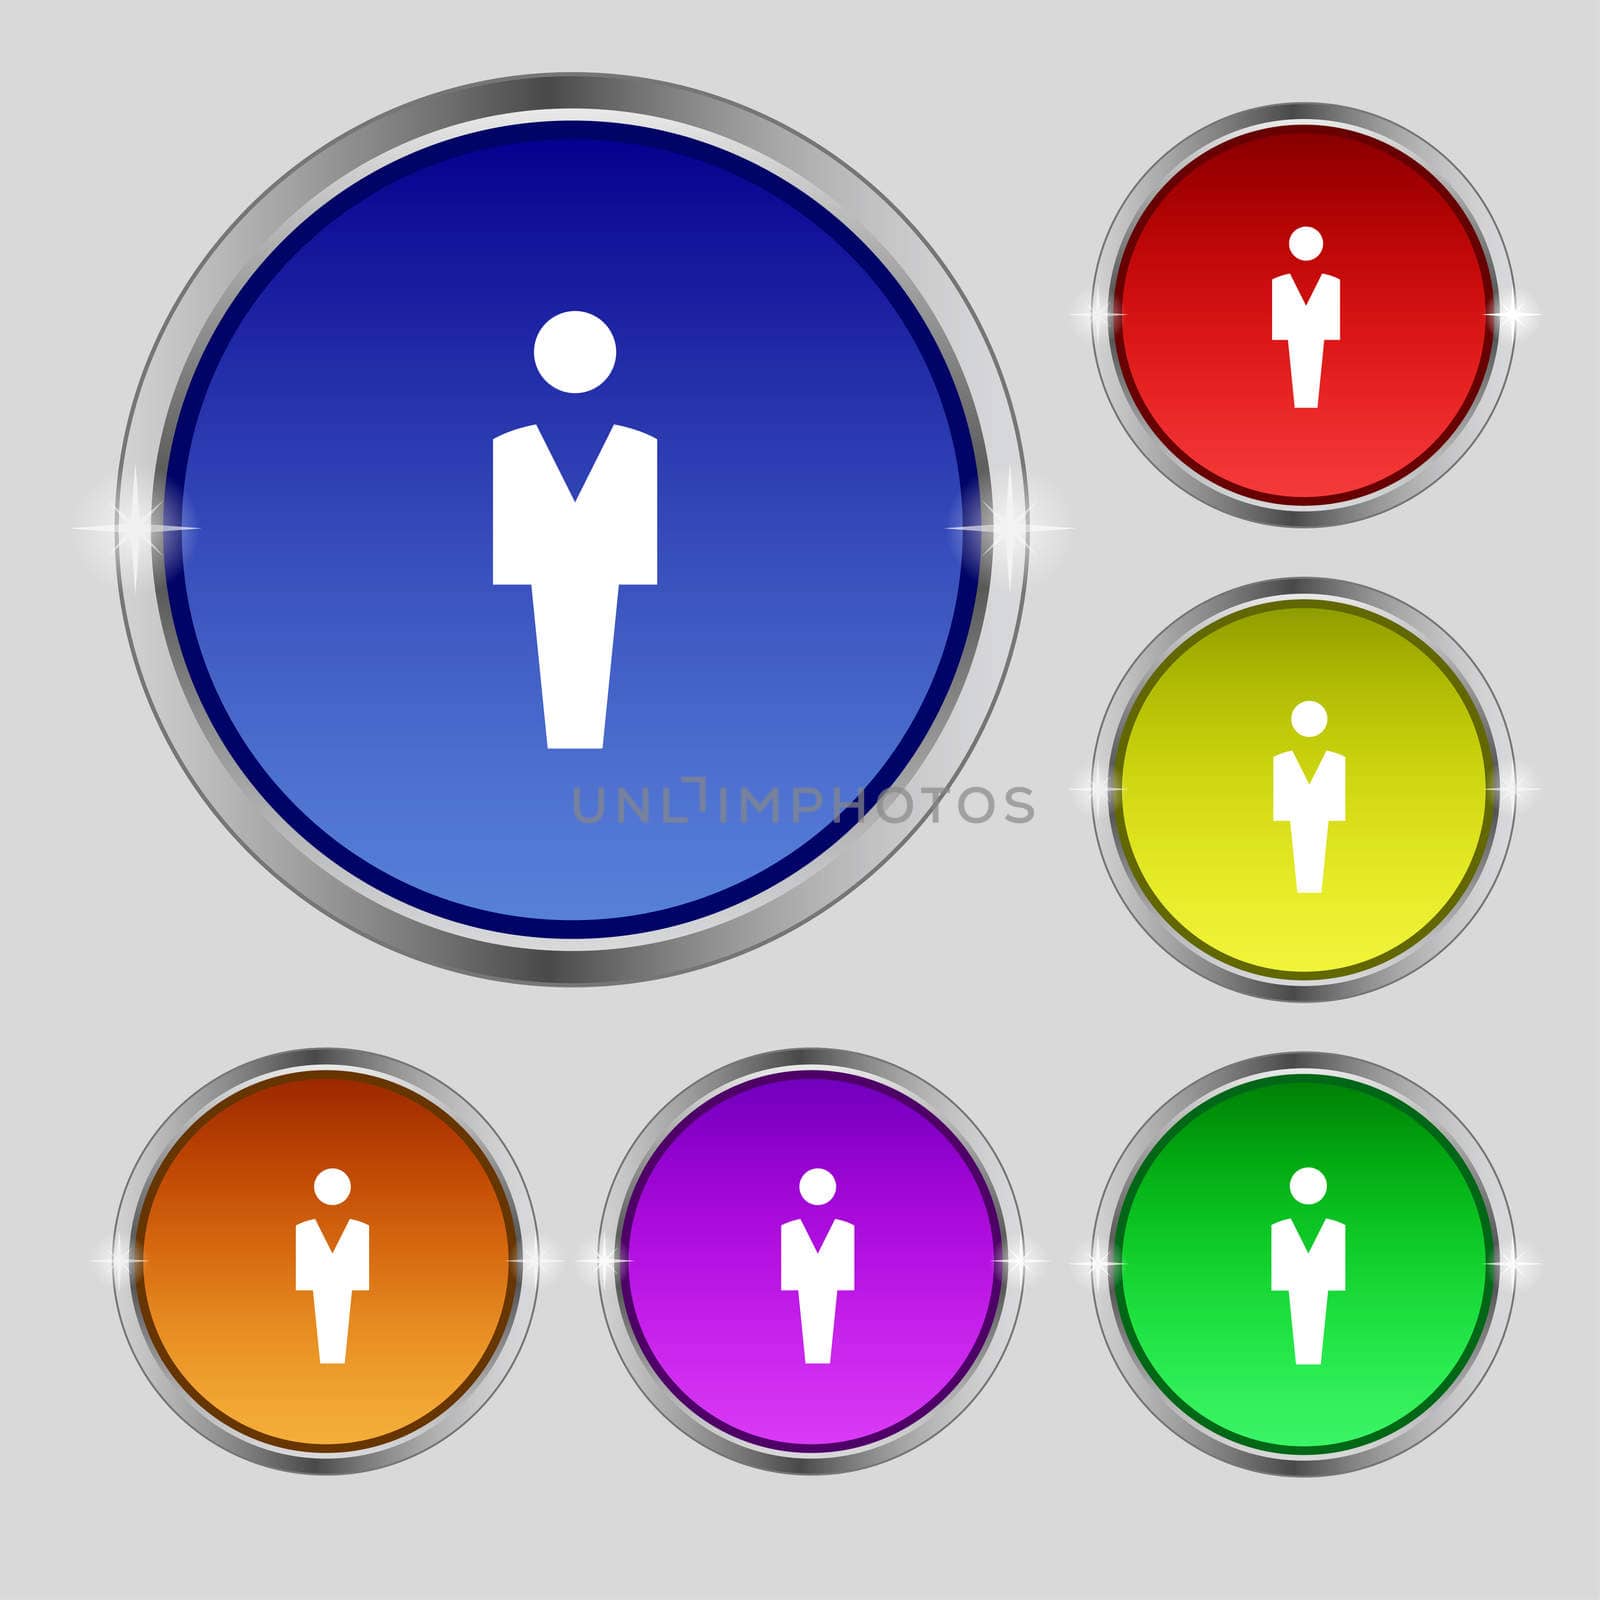 Human, Man Person, Male toilet icon sign. Round symbol on bright colourful buttons. illustration